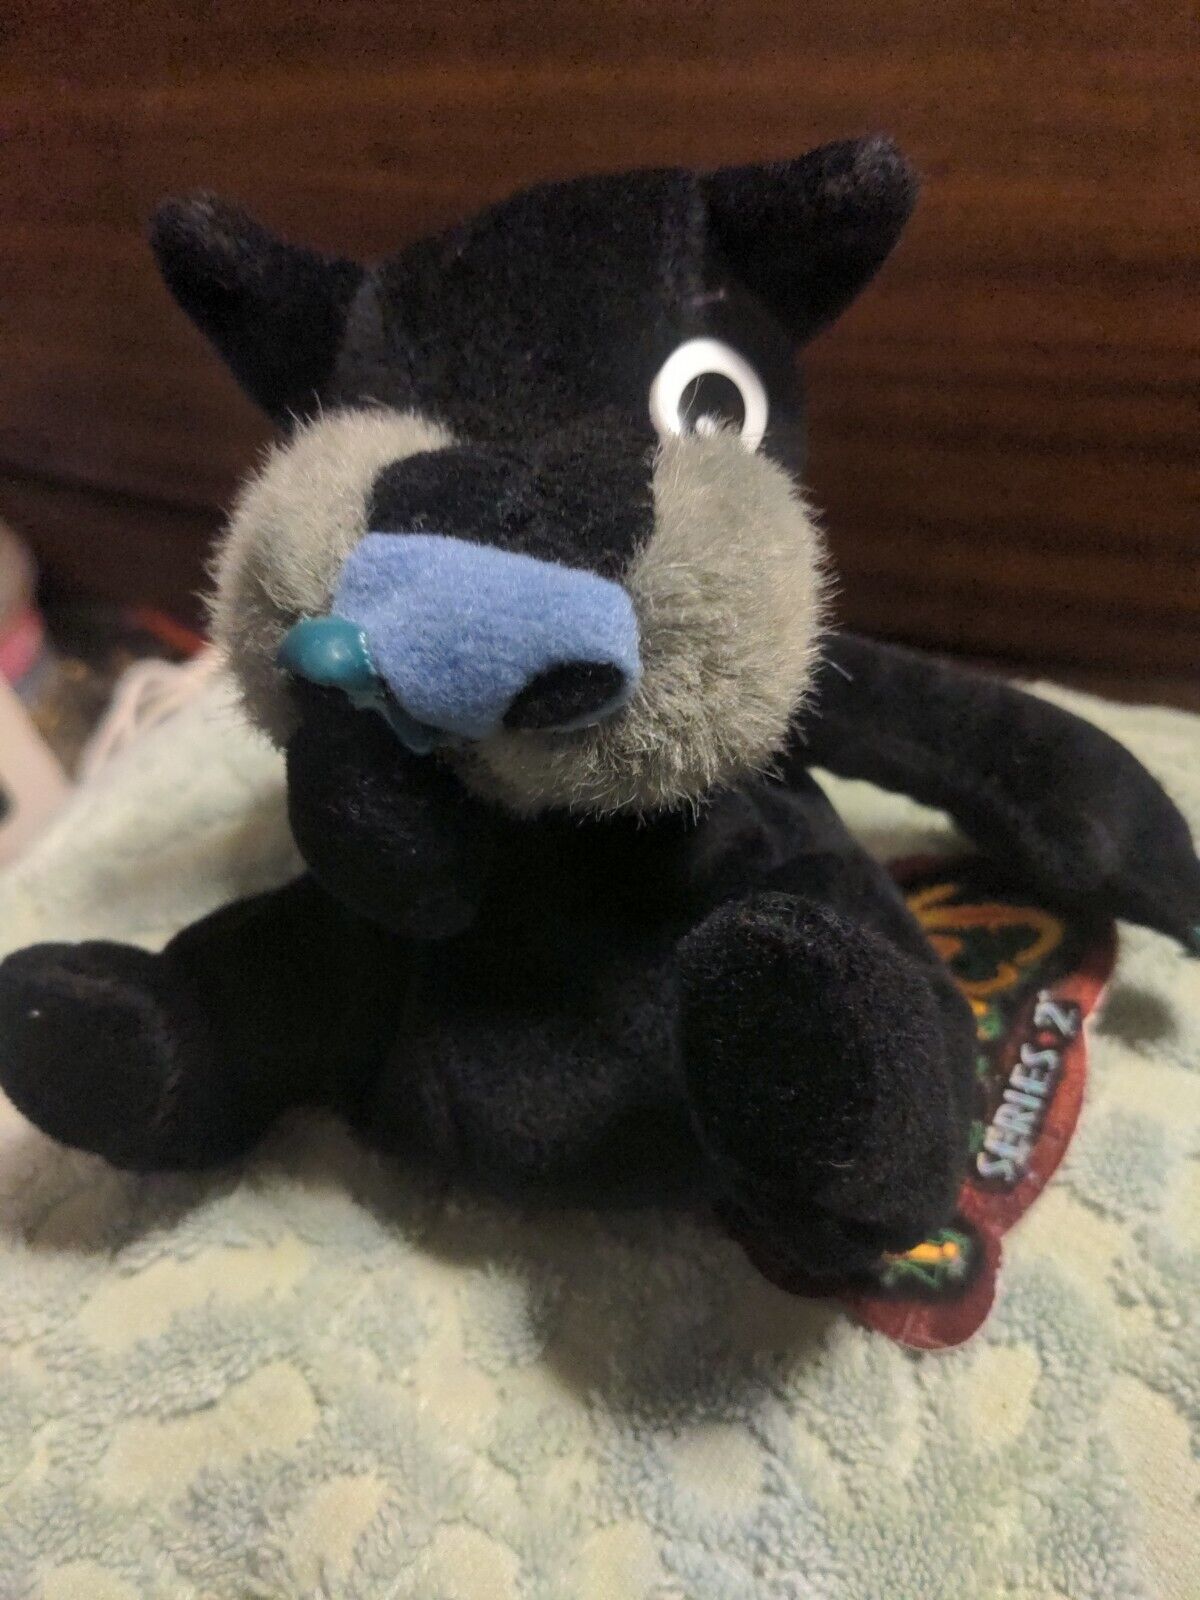 Meanies Series 2 Digger The Snottish Terrier Bean Bag Plush New 1998 W/tag